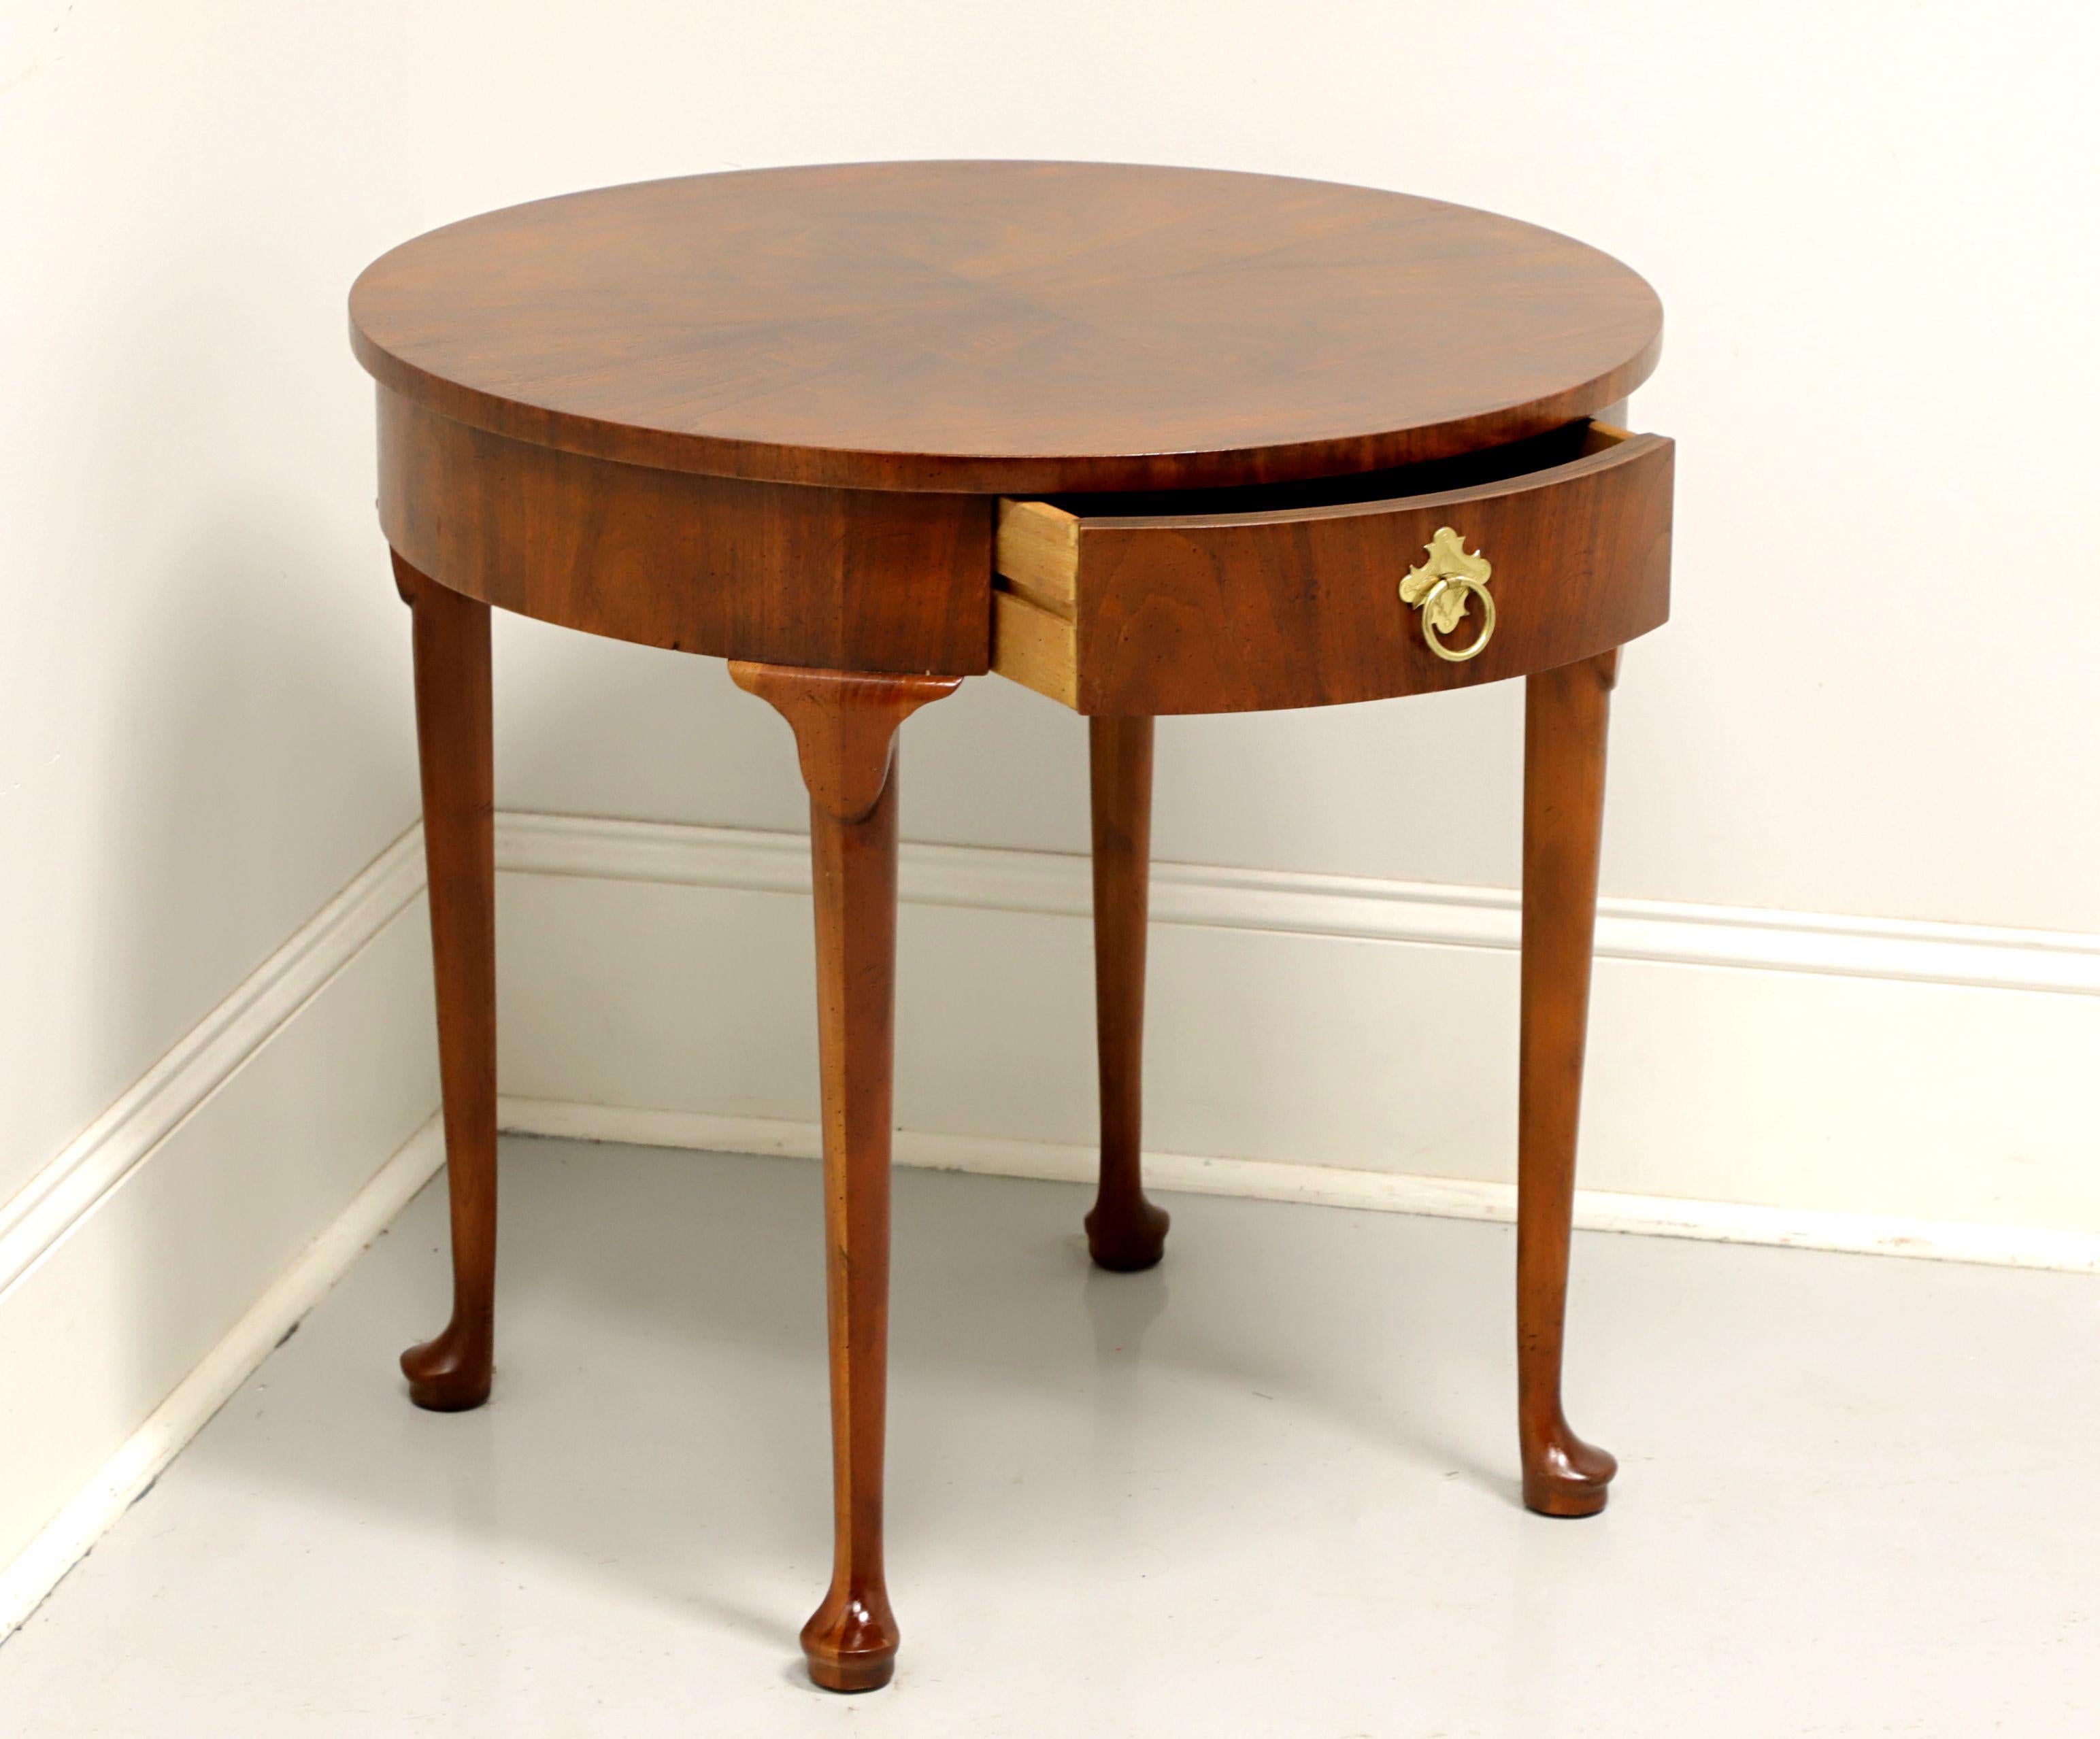 20th Century BAKER Bookmatched Walnut Georgian Style Round Accent Table